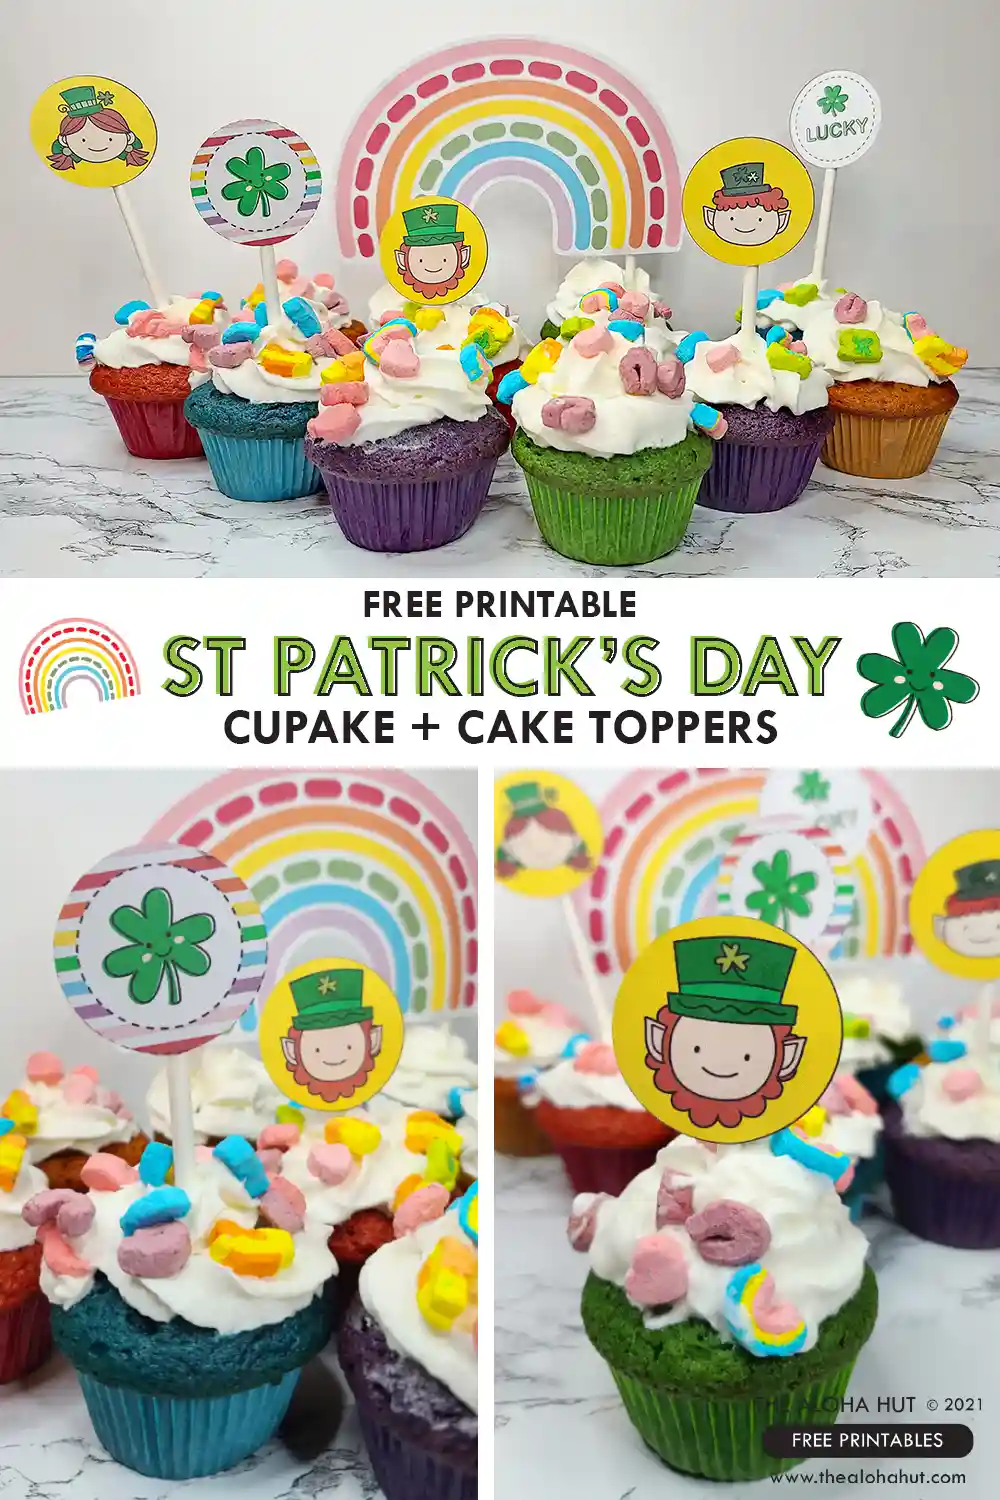 Printable St. Patrick's Day cake topper and cupcake topper ideas. Includes rainbow cupcake toppers, leprechaun cupcake toppers, and also four leaf clover cupcake toppers. You can easily add them to a cake for a fun and colorful St. Patrick's Day cake topper. Or print and cut them out to use as a gift tag for your St. Patrick's Day treats and gifts.